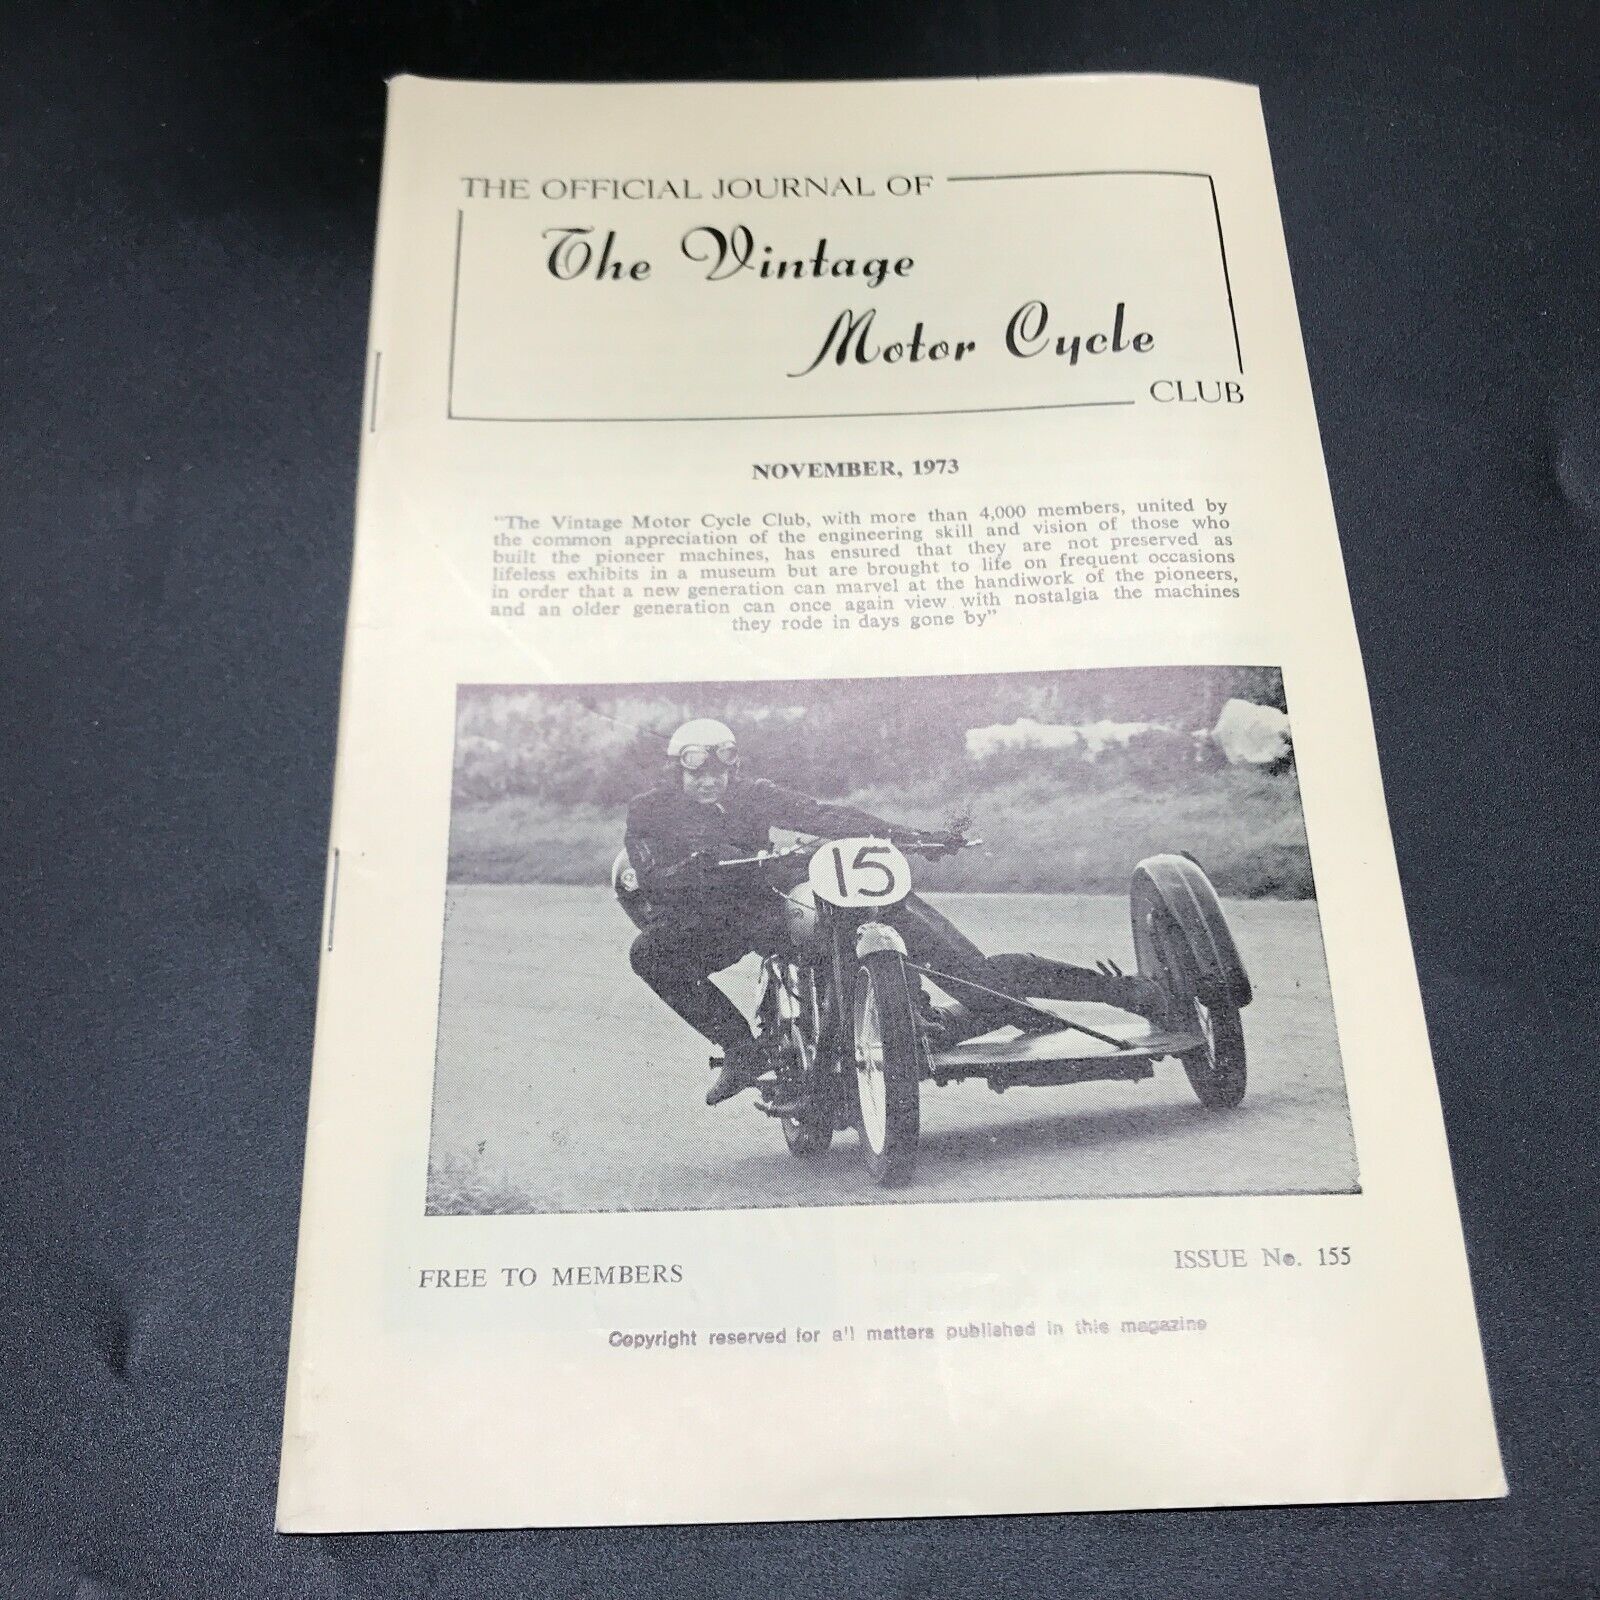 THE OFFICIAL JOURNAL THE VINTAGE MOTORCYCLE CLUB MAGAZINE NOVEMBER 1973